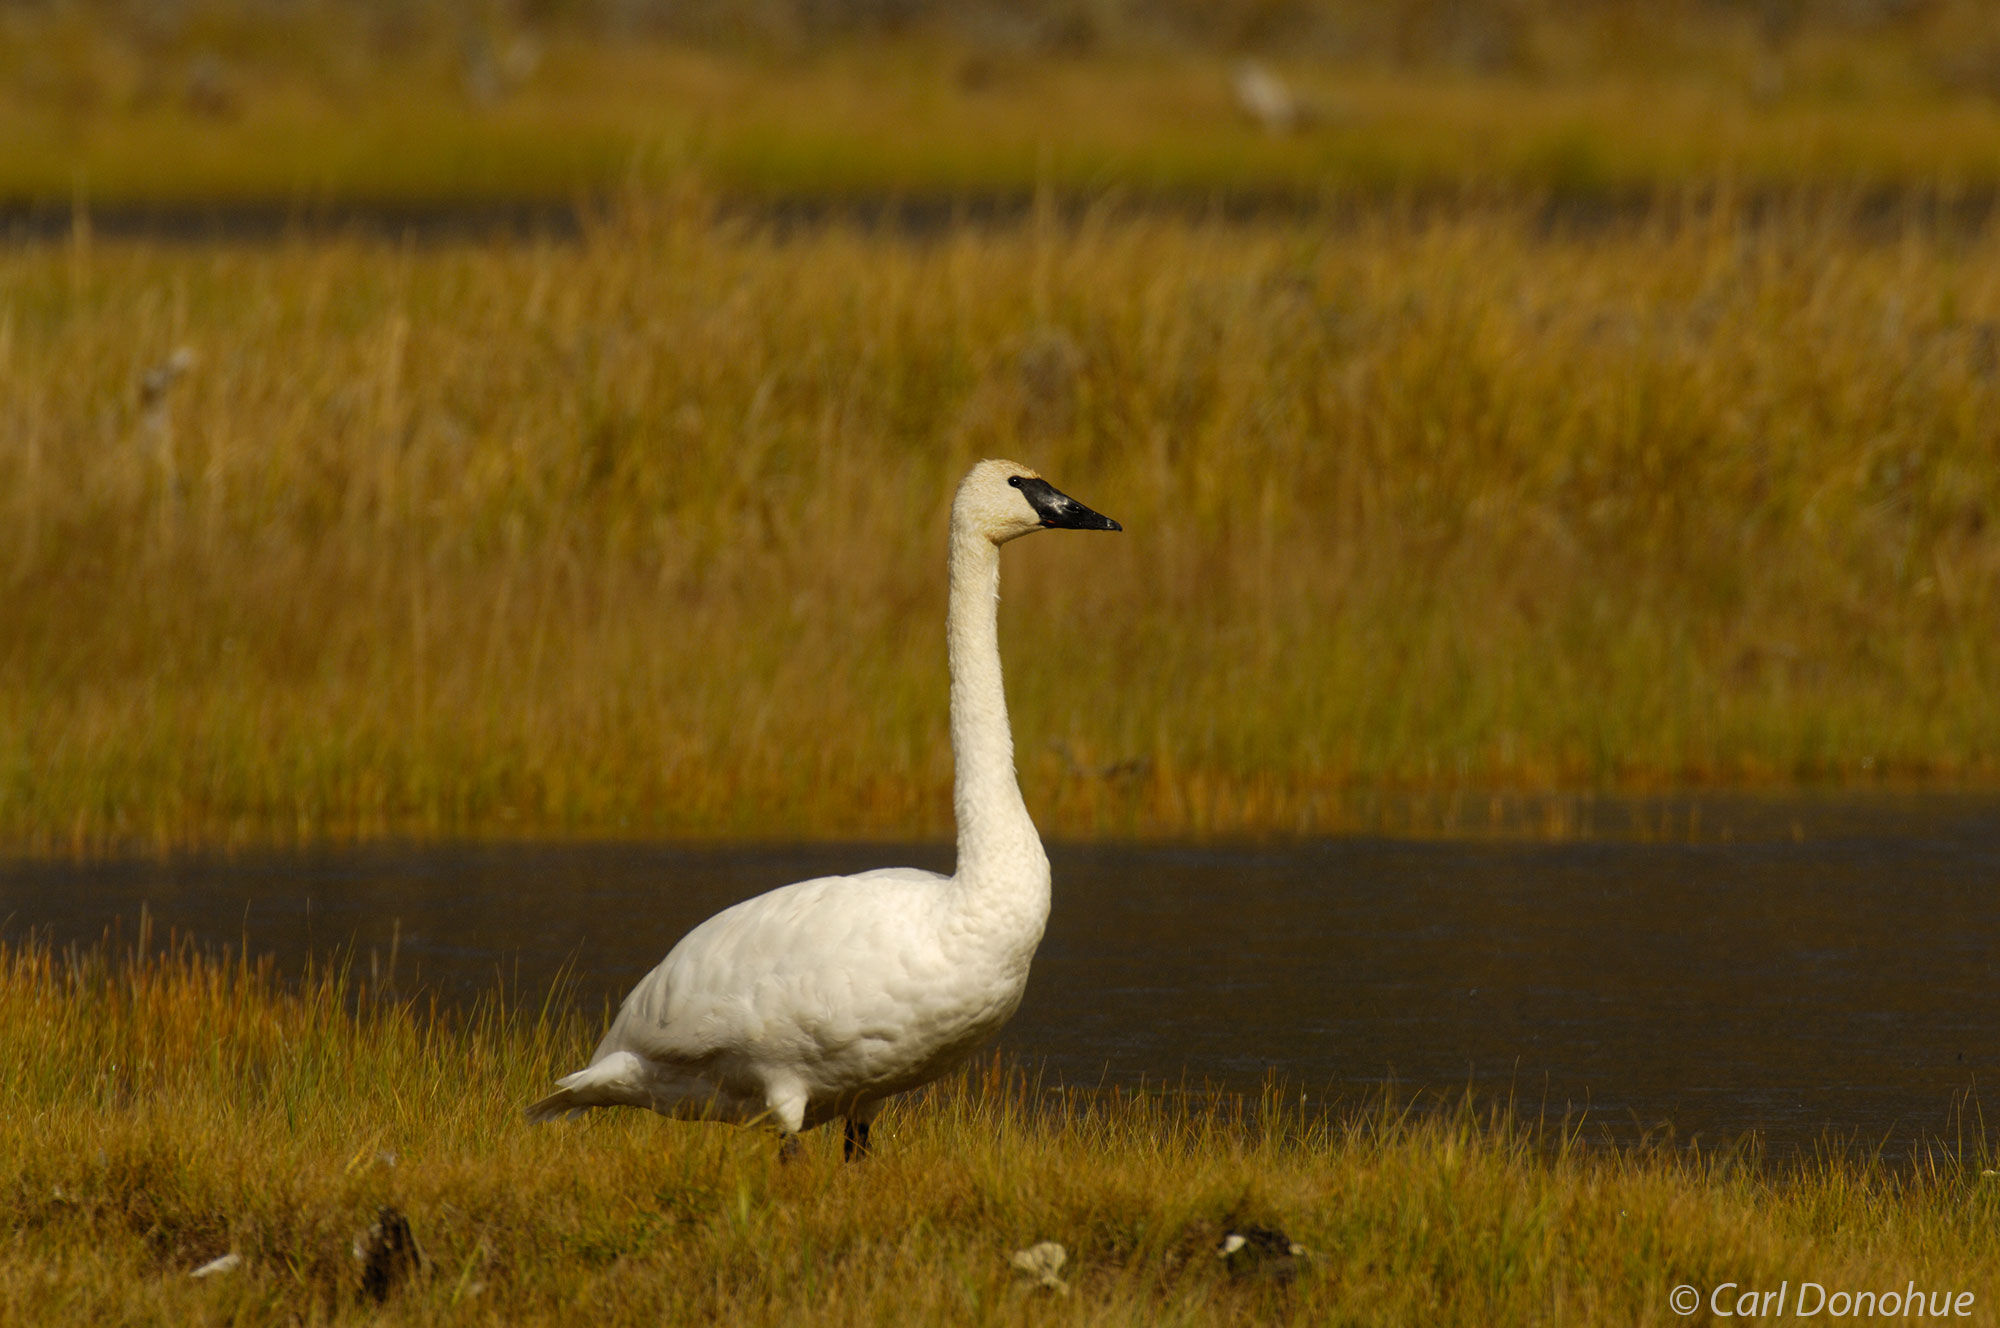 Tundra swan on the marshy ground of the boreal forest in Wrangell - St. Elias National Park, Alaska.